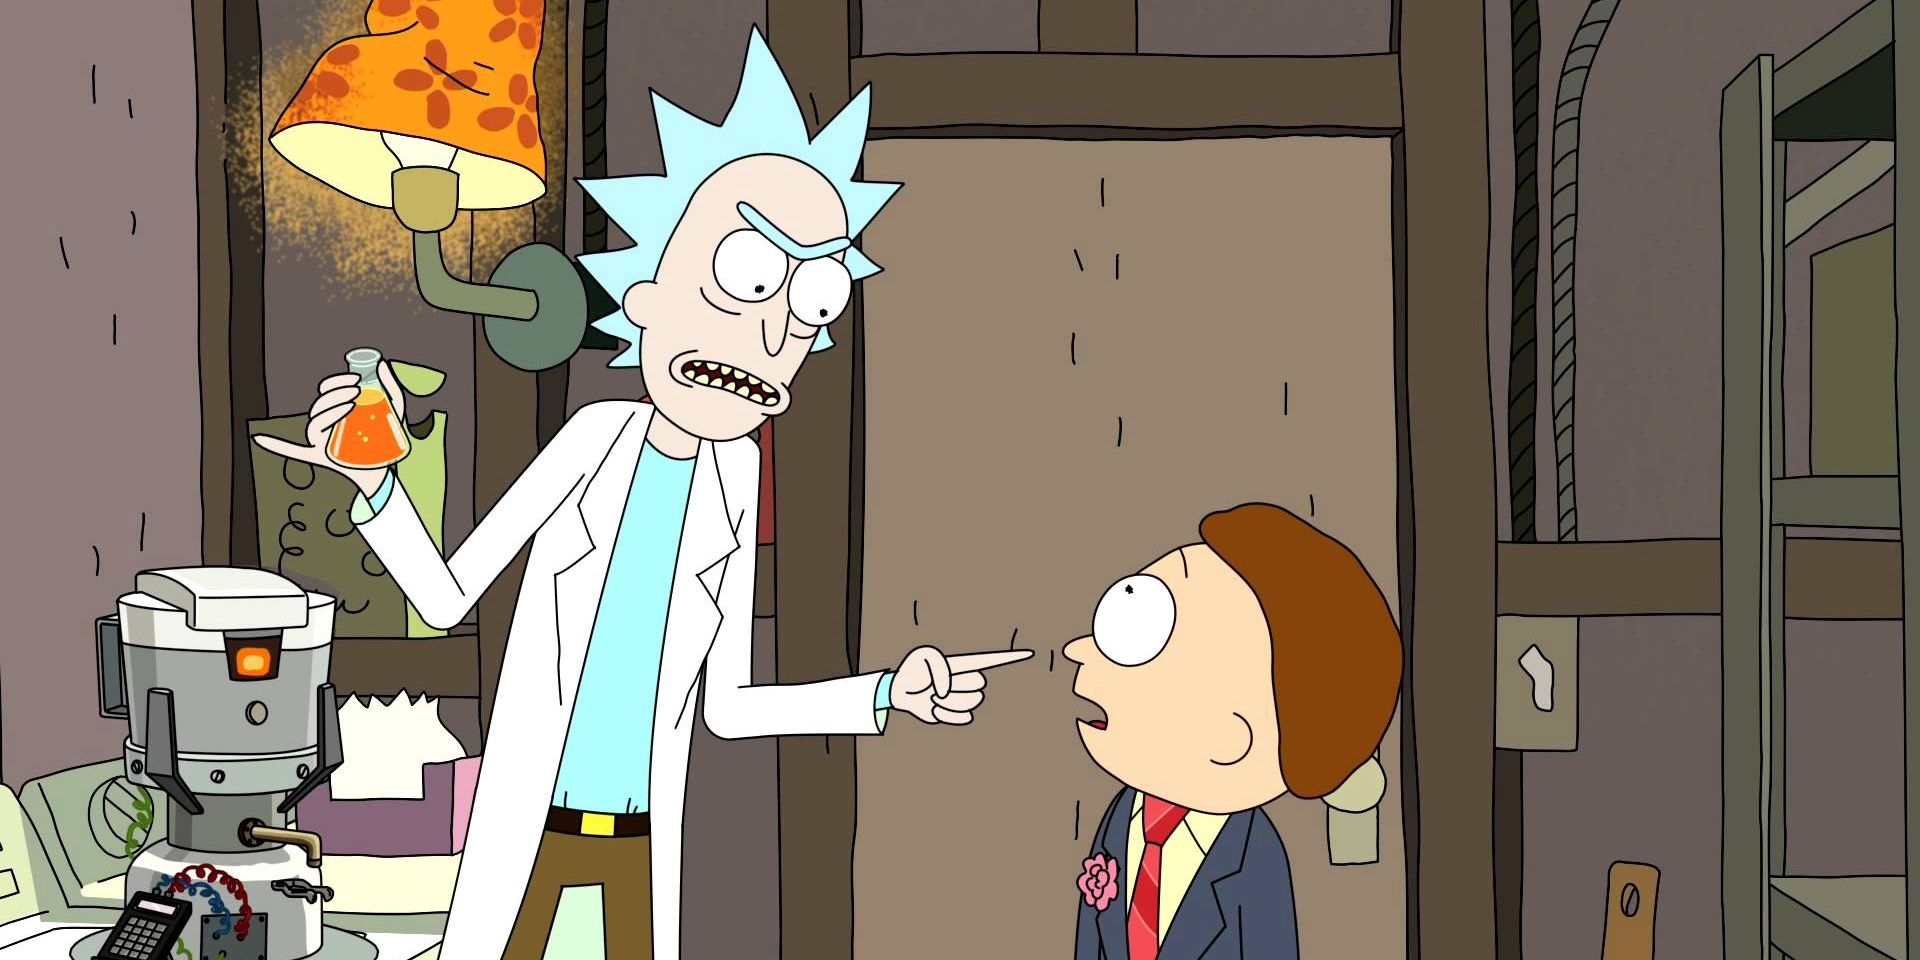 Rick yelling at Morty in Rick and Morty